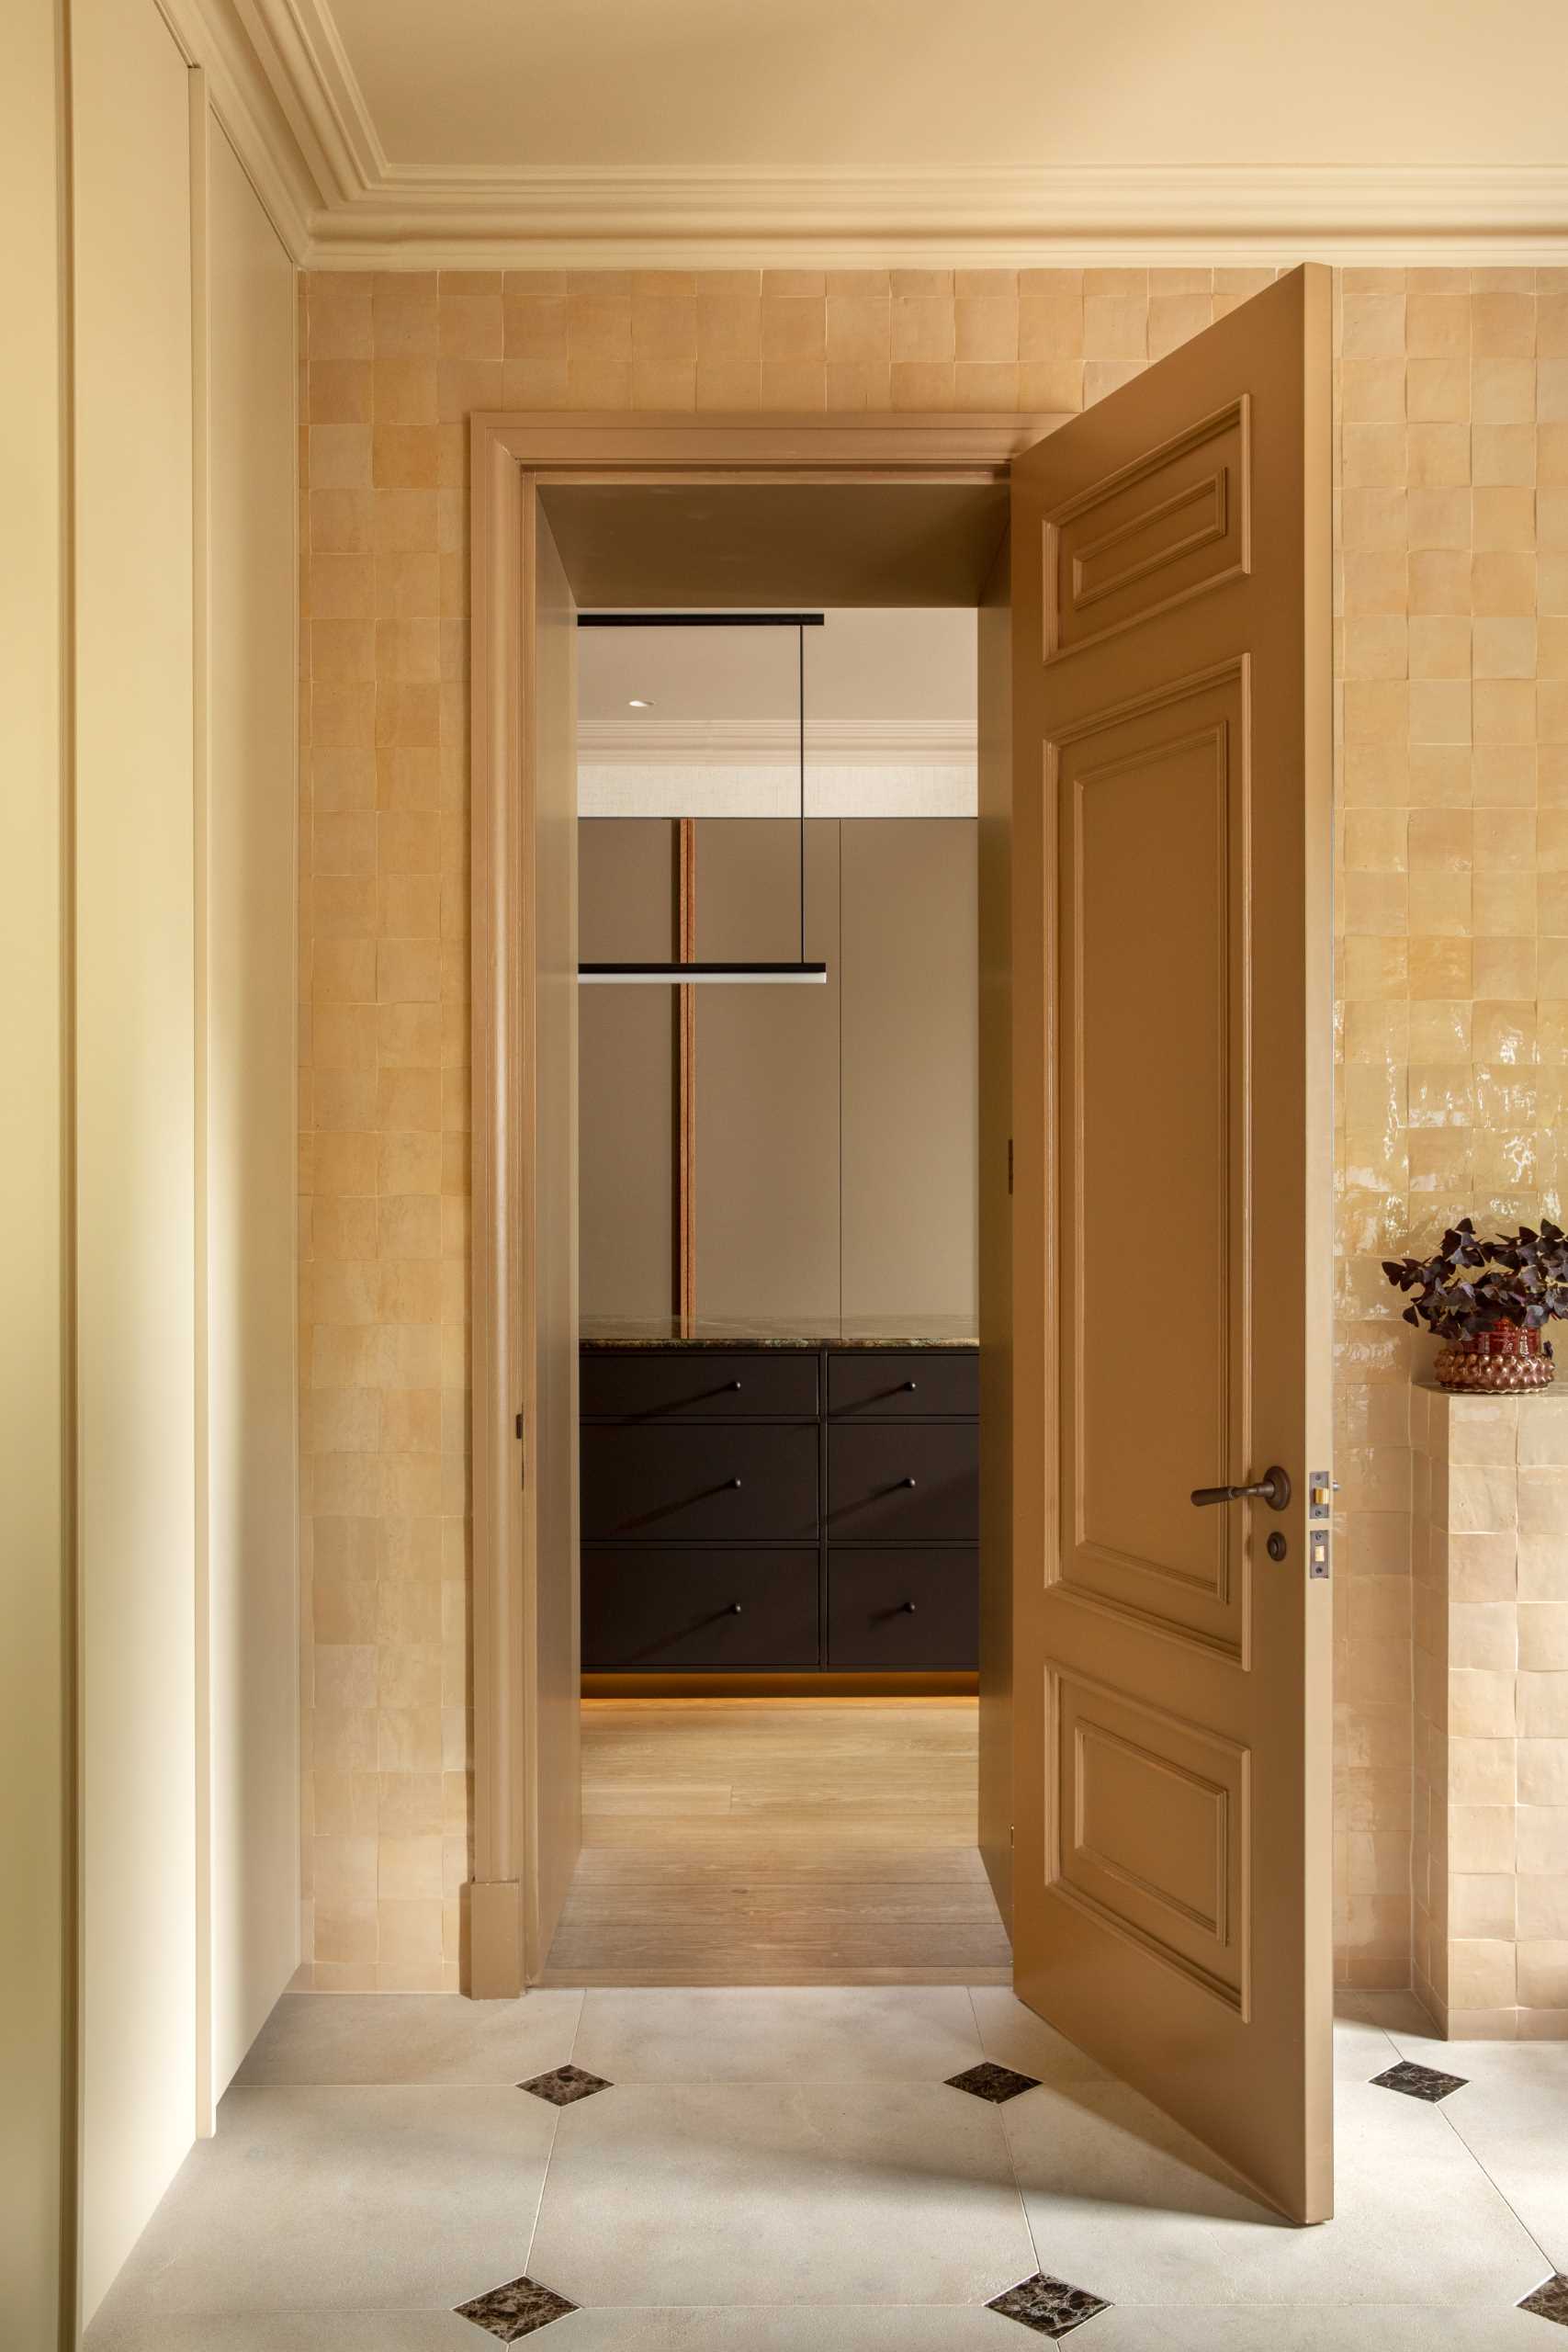 A bathroom with square tan colored tiles covering the walls.